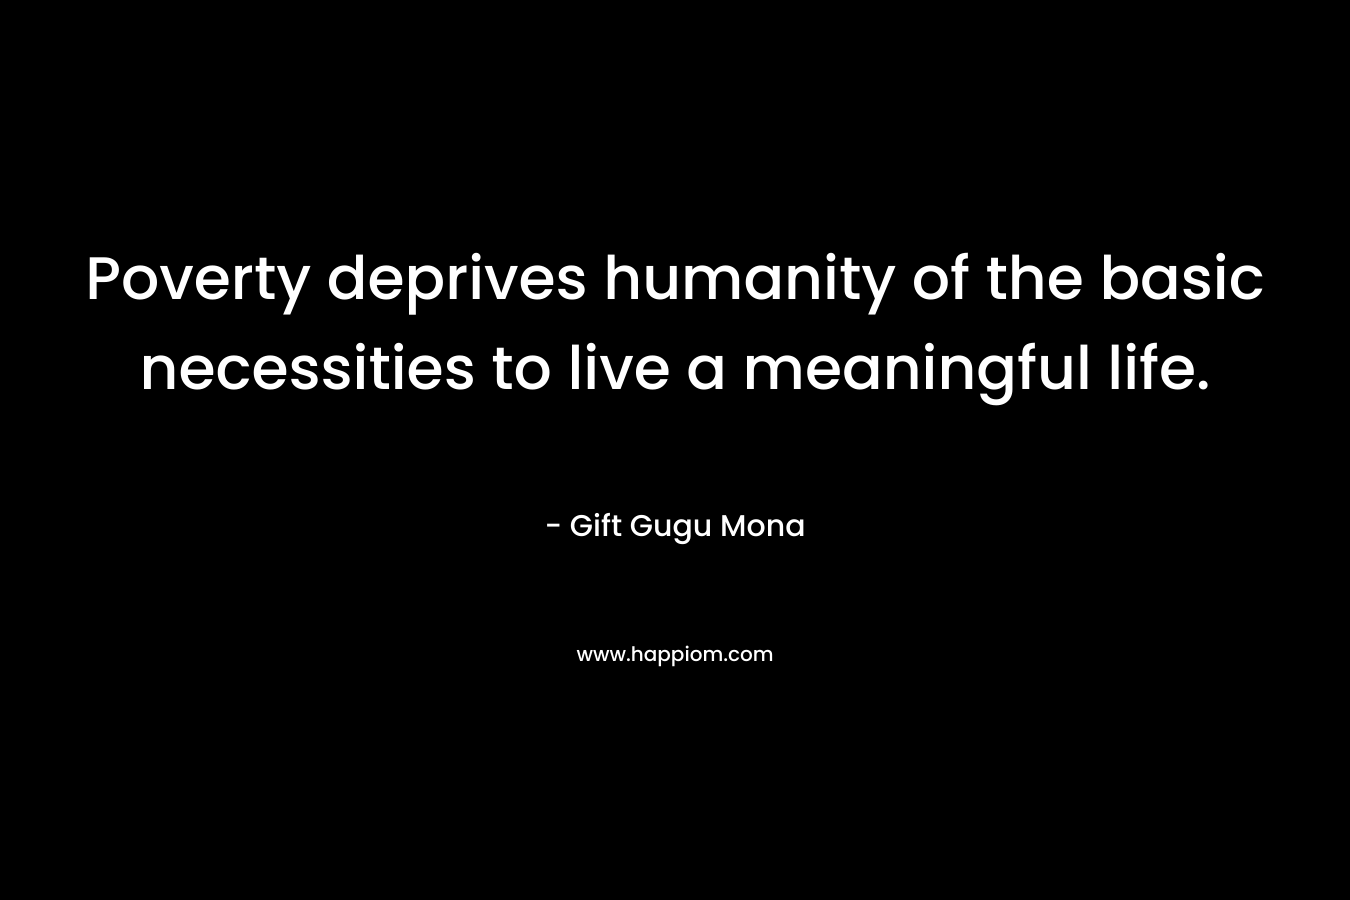 Poverty deprives humanity of the basic necessities to live a meaningful life. – Gift Gugu Mona